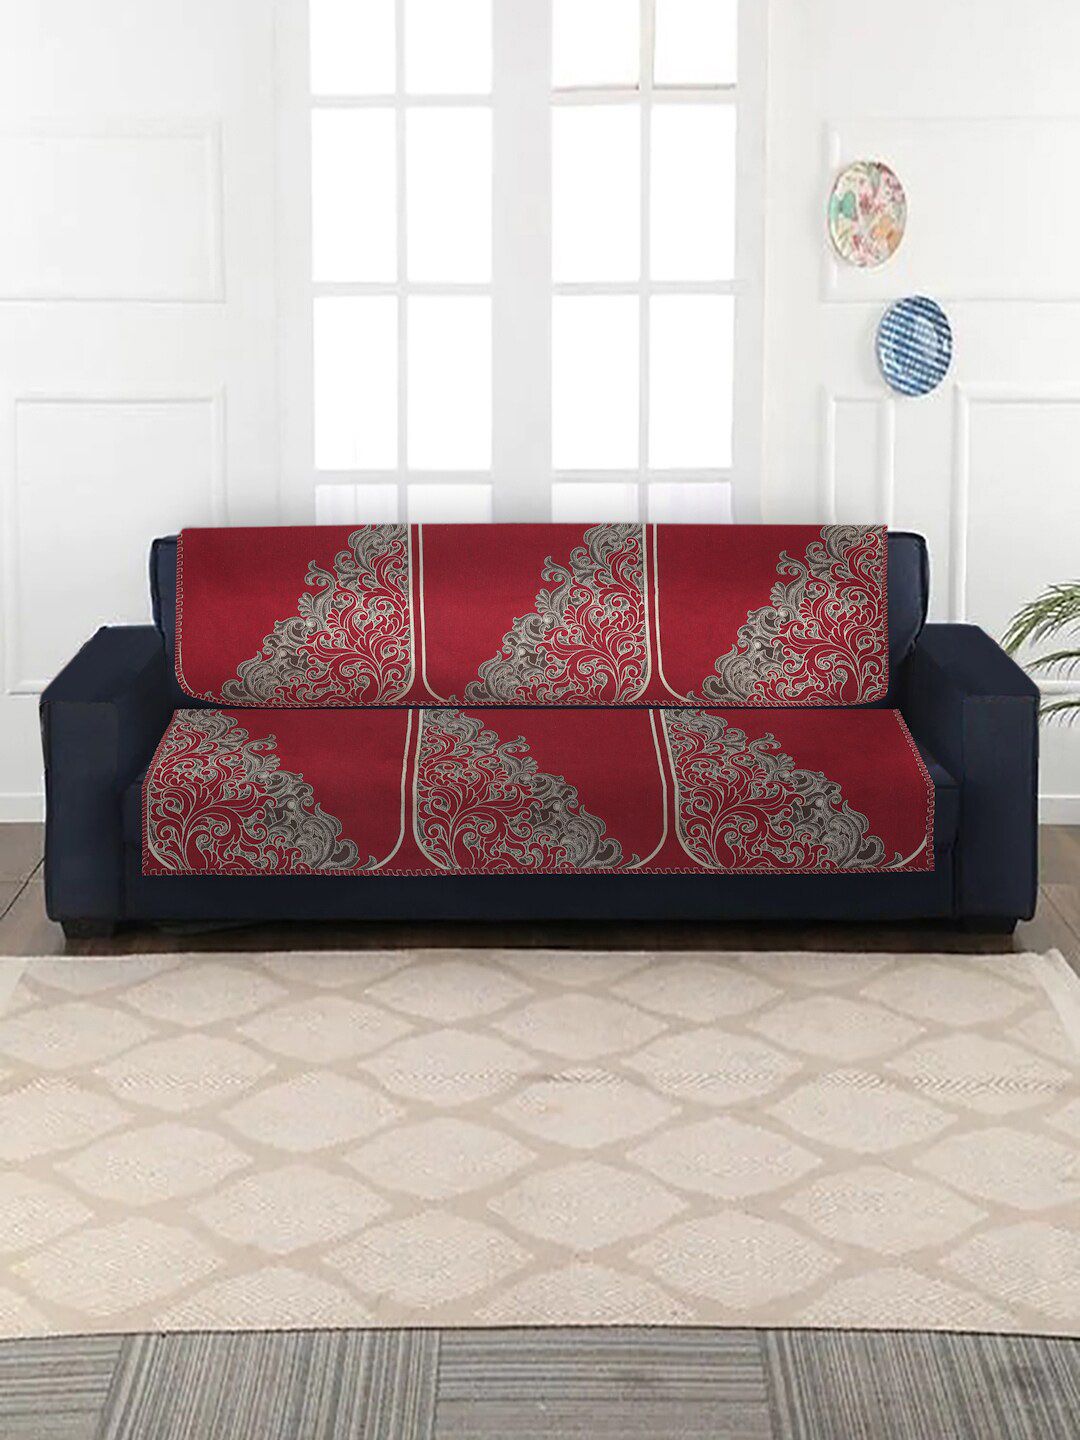 MULTITEX Maroon Printed Jacqyard 5 Seater Sofa Cover Price in India